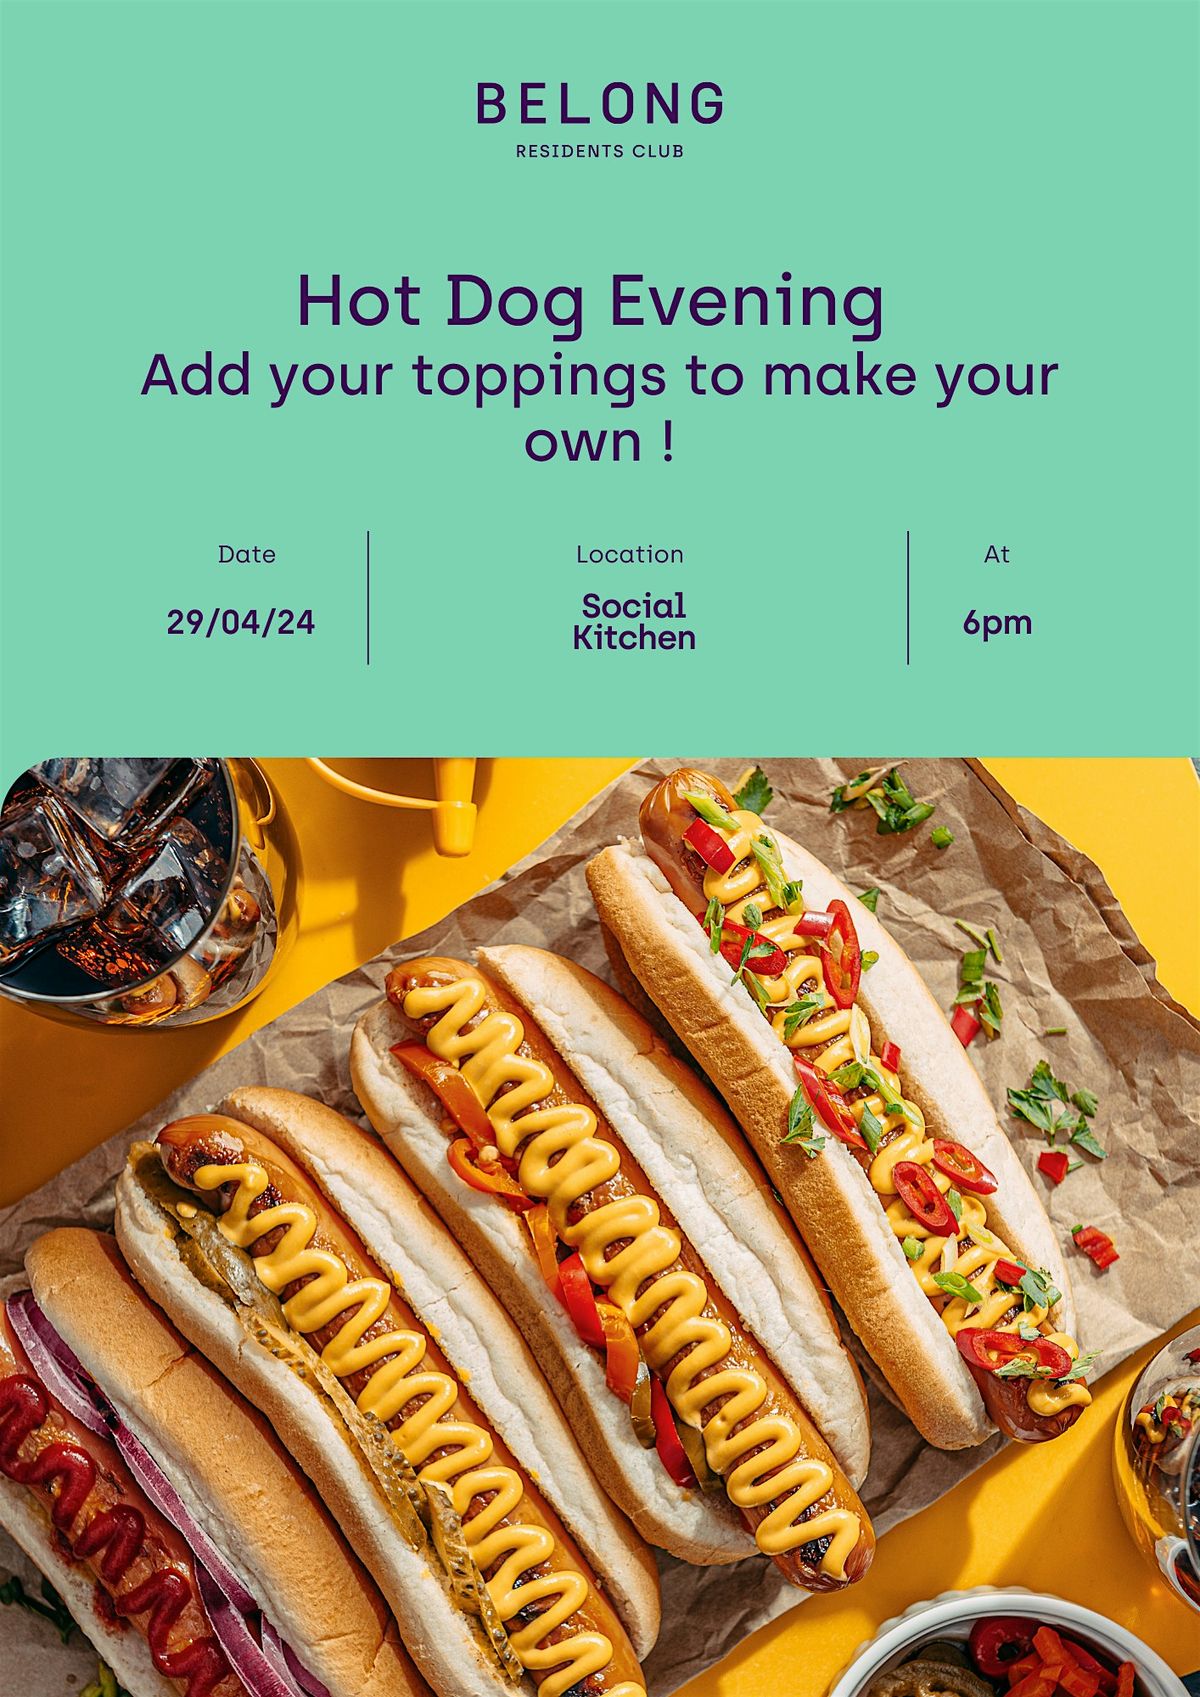 Hot Dog Evening on the 29th of April